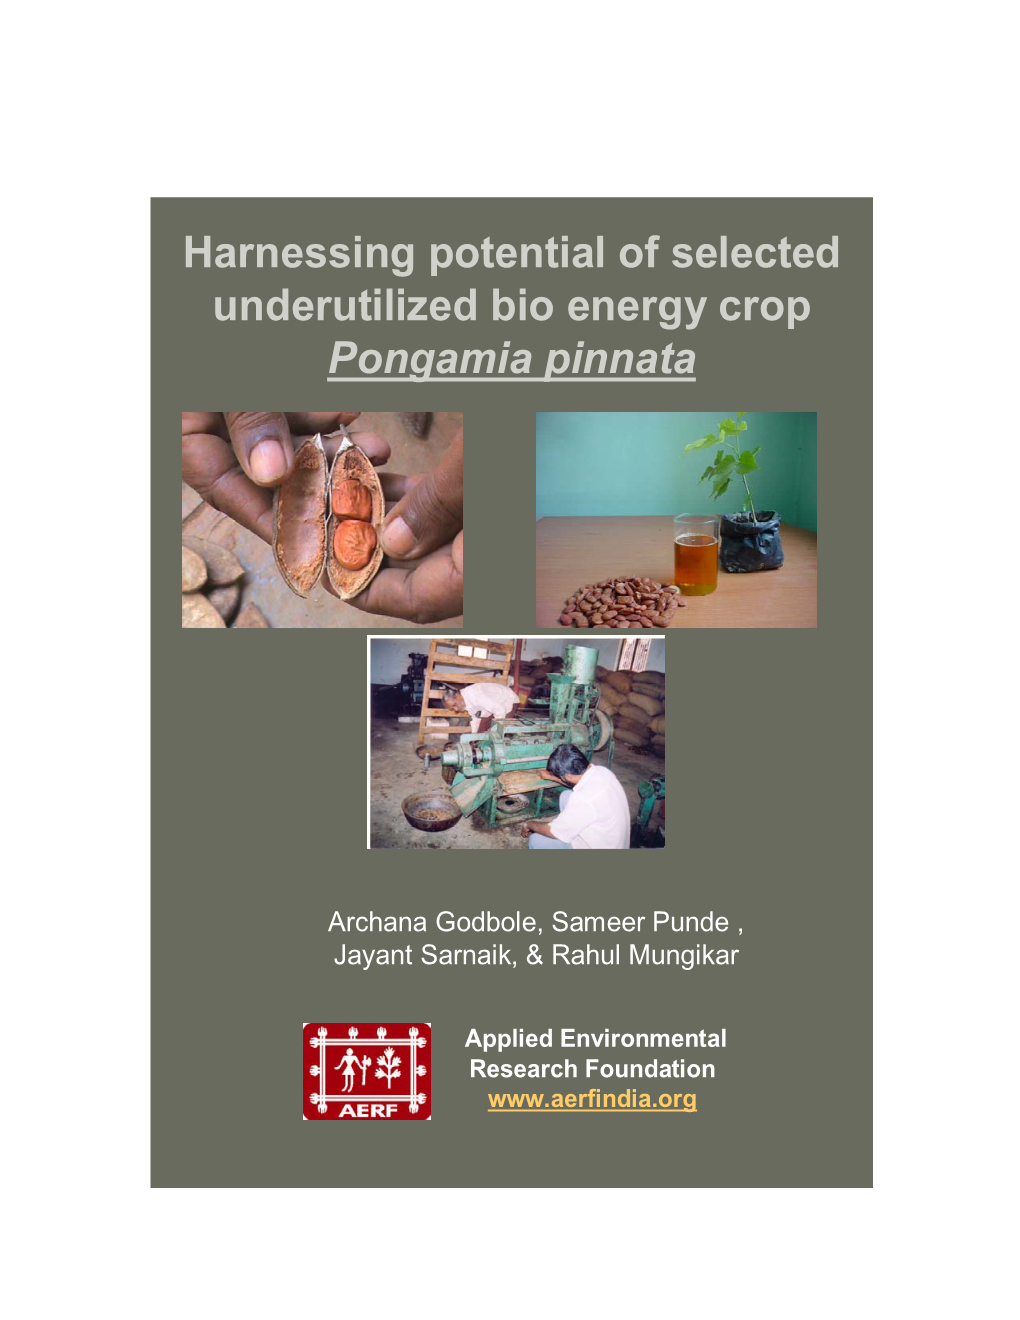 Harnessing Potential of Selected Underutilized Bio Energy Crop Pongamia Pinnata